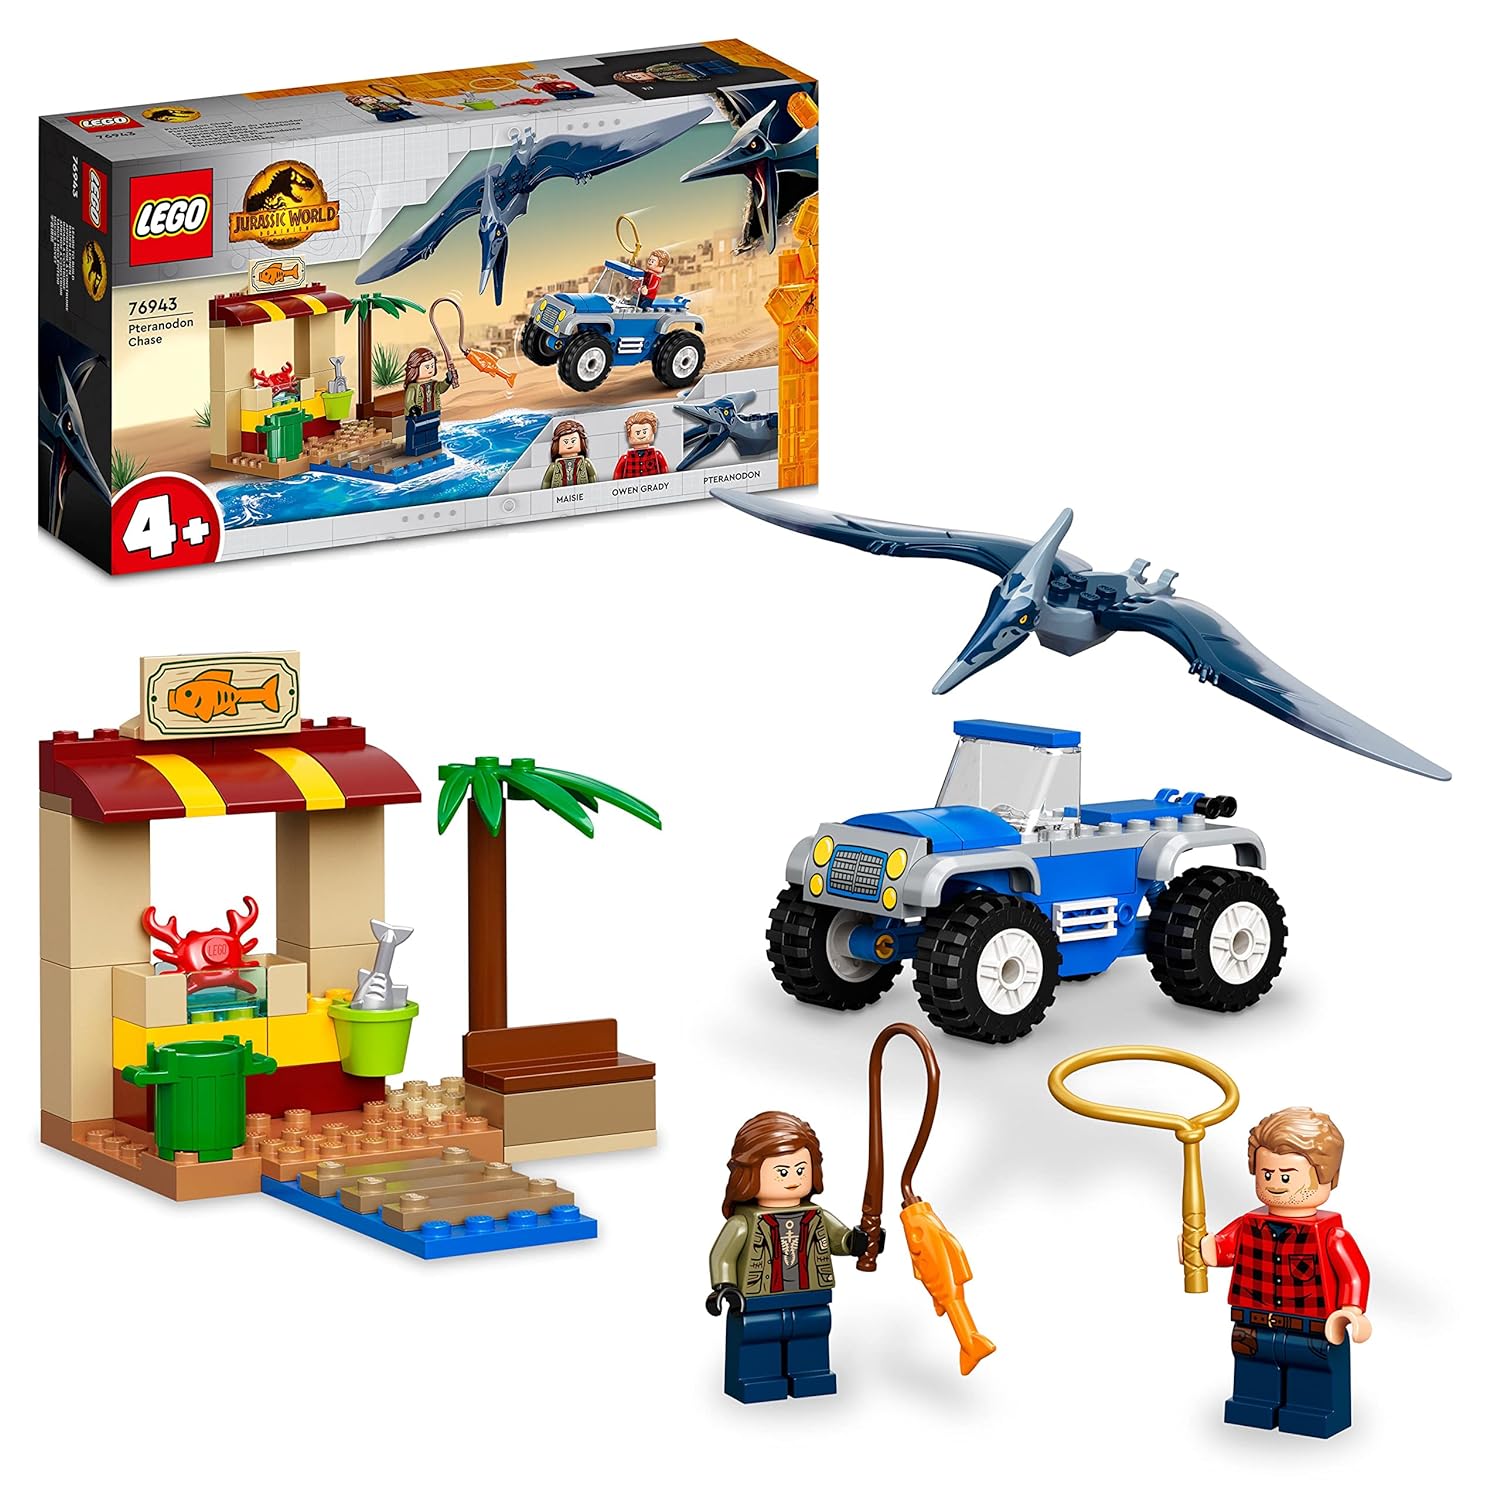 LEGO Jurassic World Pteranodon Chase Building Kit for Ages 4+